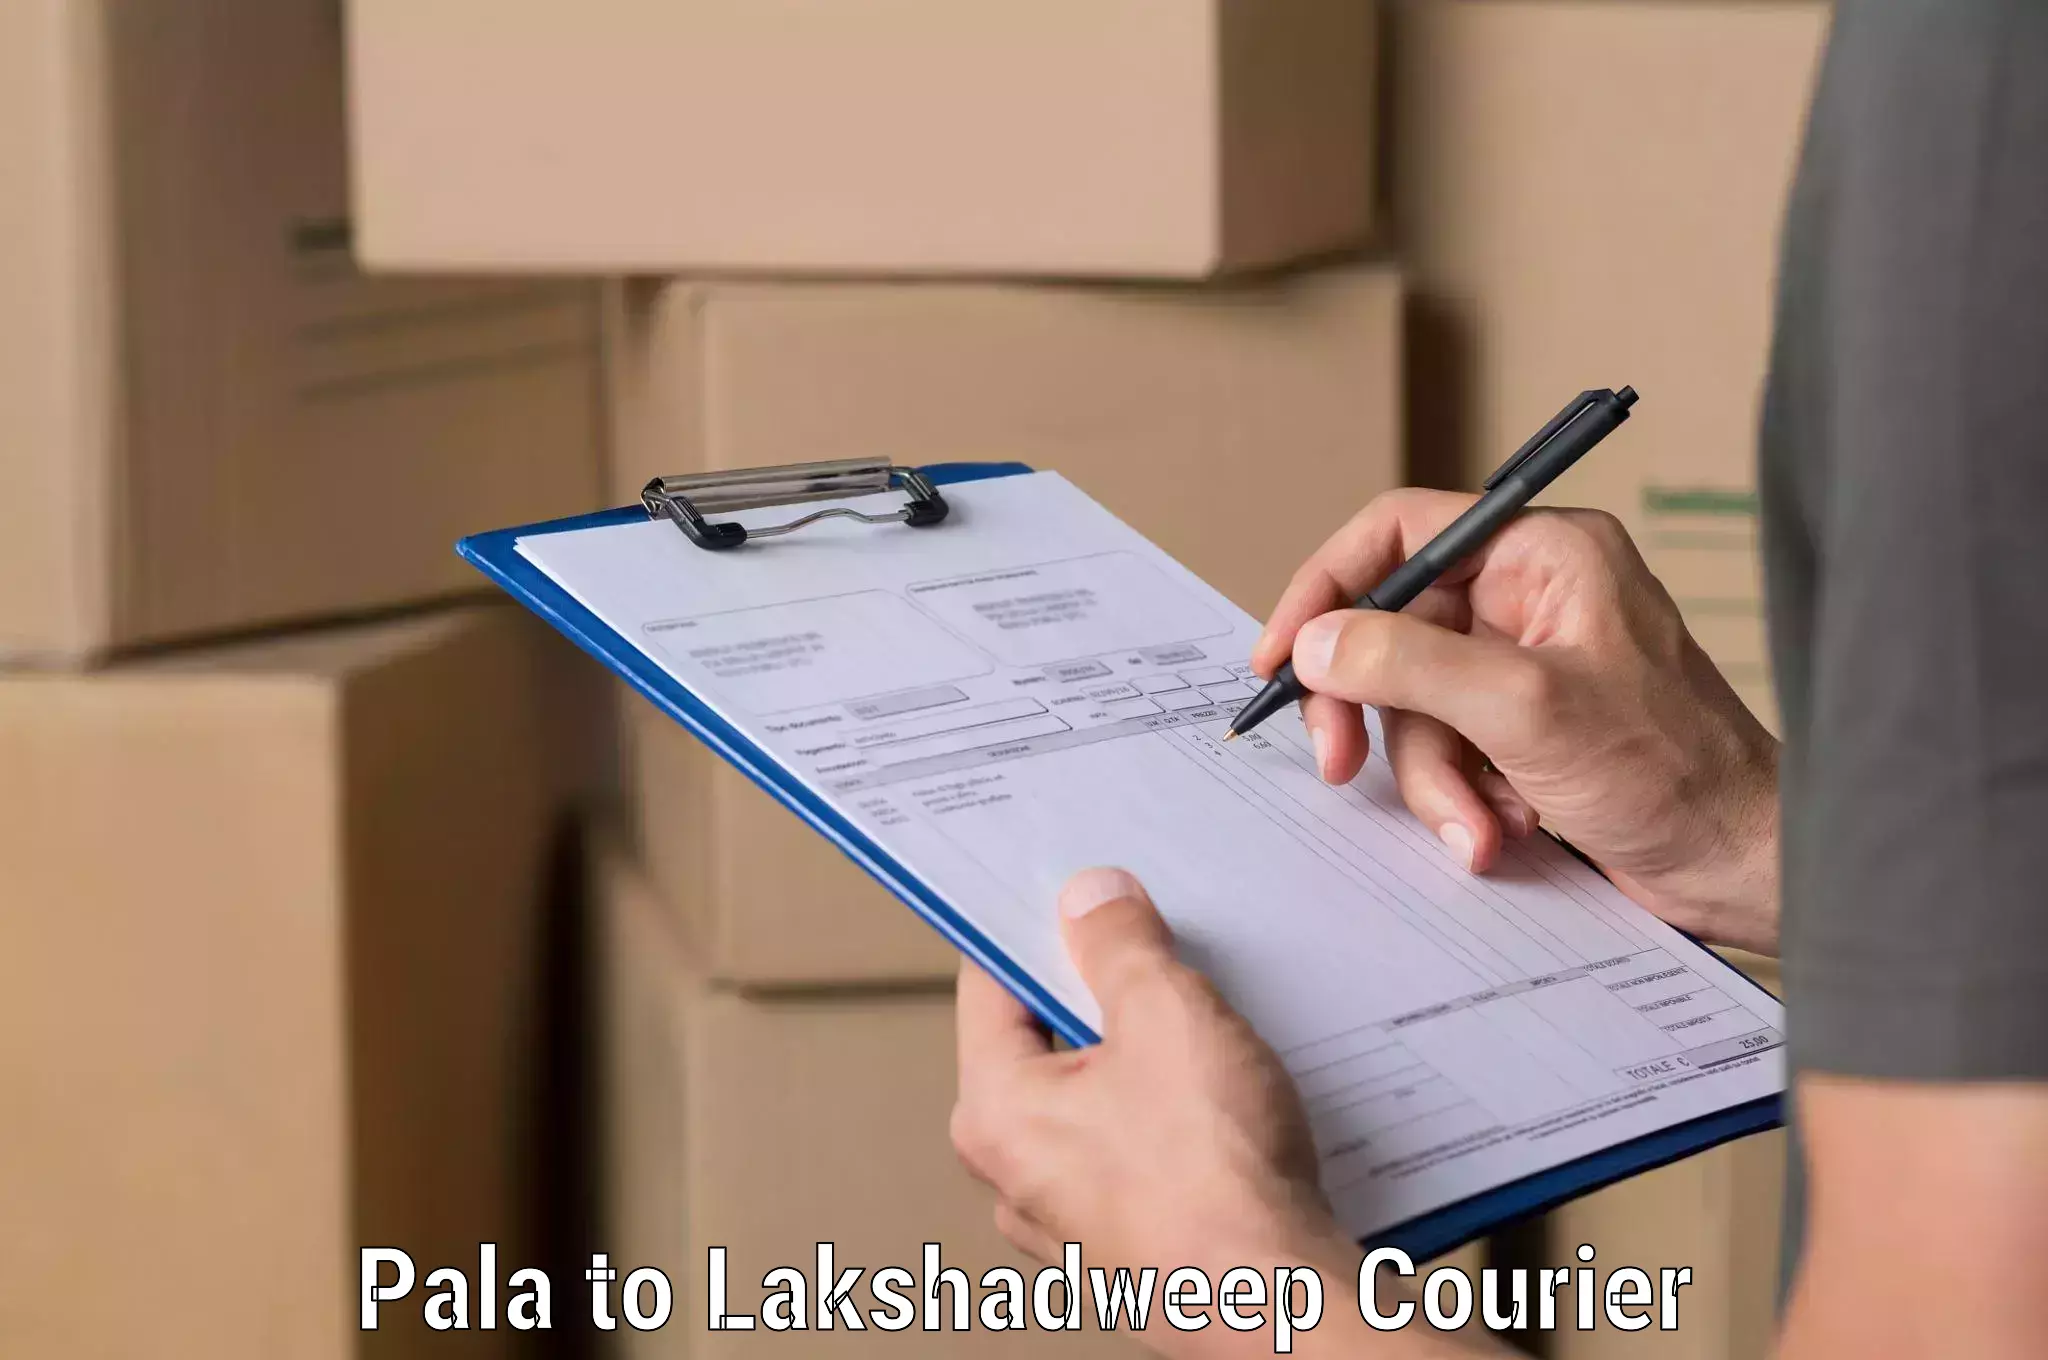 Global delivery options Pala to Lakshadweep